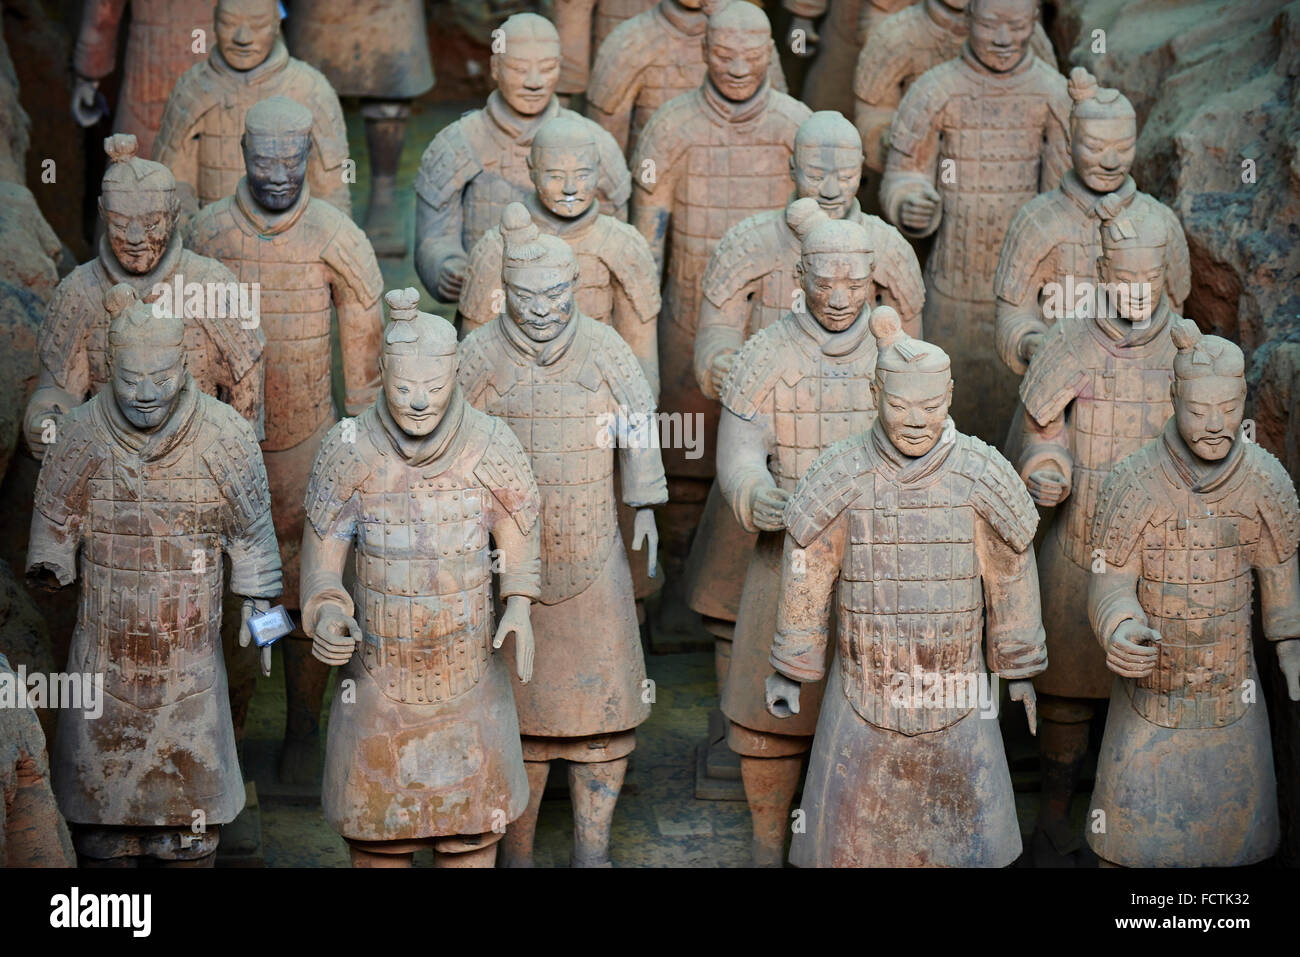 China, Shaanxi province, Xian, Lintong site, Detail of some of the six thousand statues in the Army of Terracotta Warriors, 2000 Stock Photo